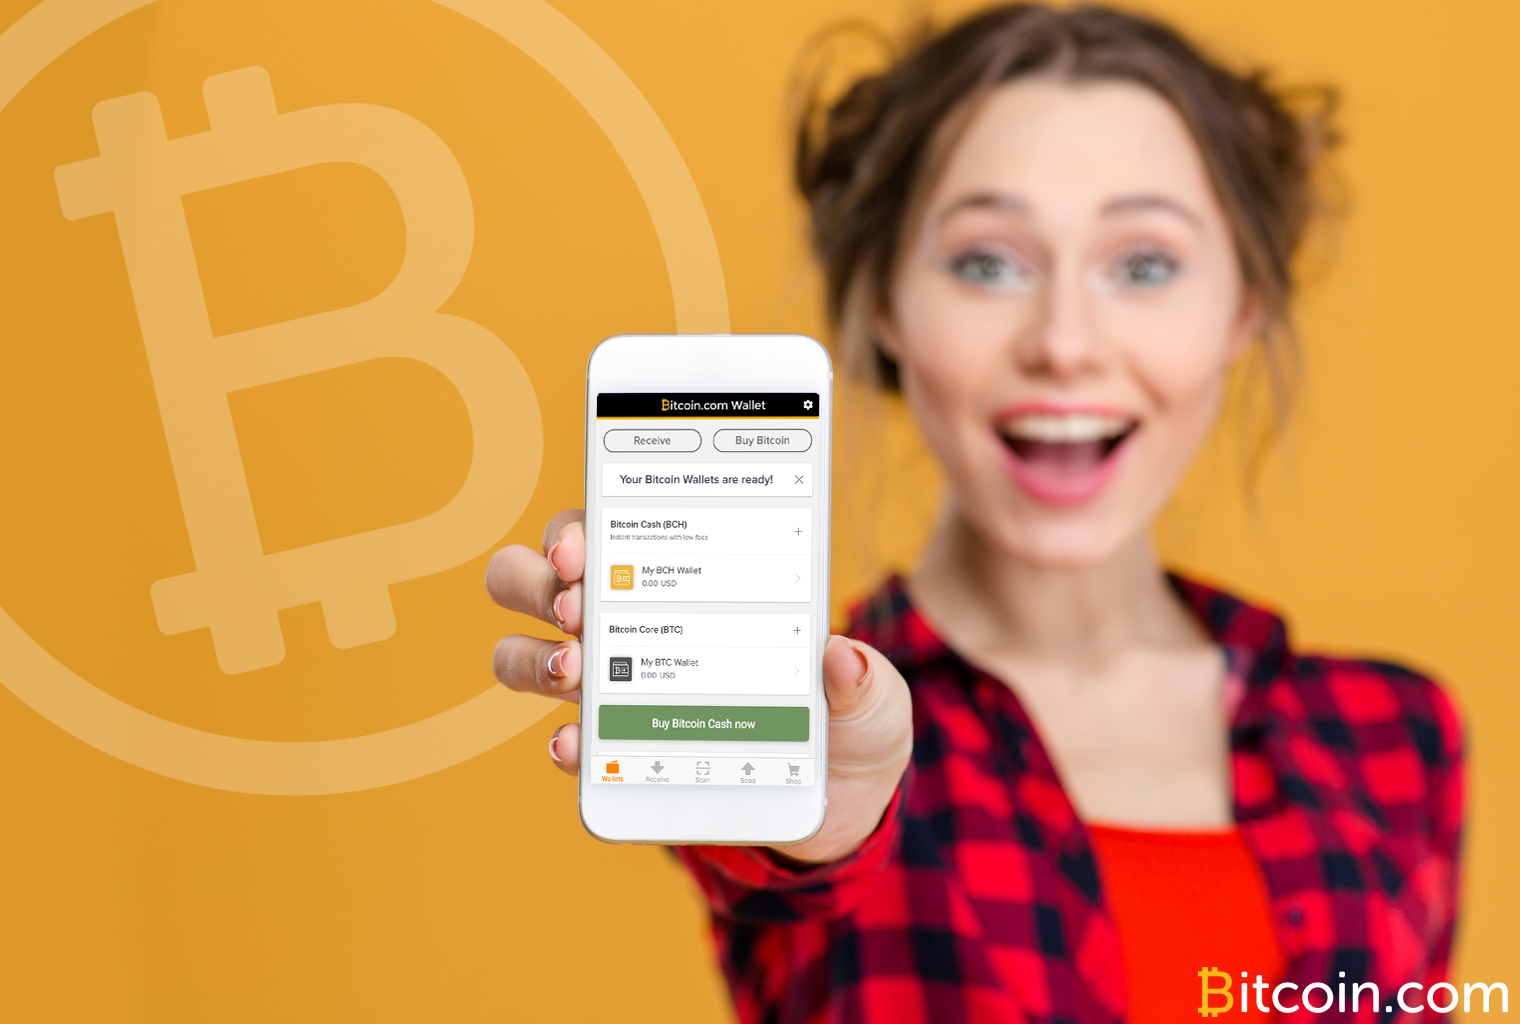 Uk And Europe Based Users Can Now Buy Bitcoi!   n Cash Inside The - 